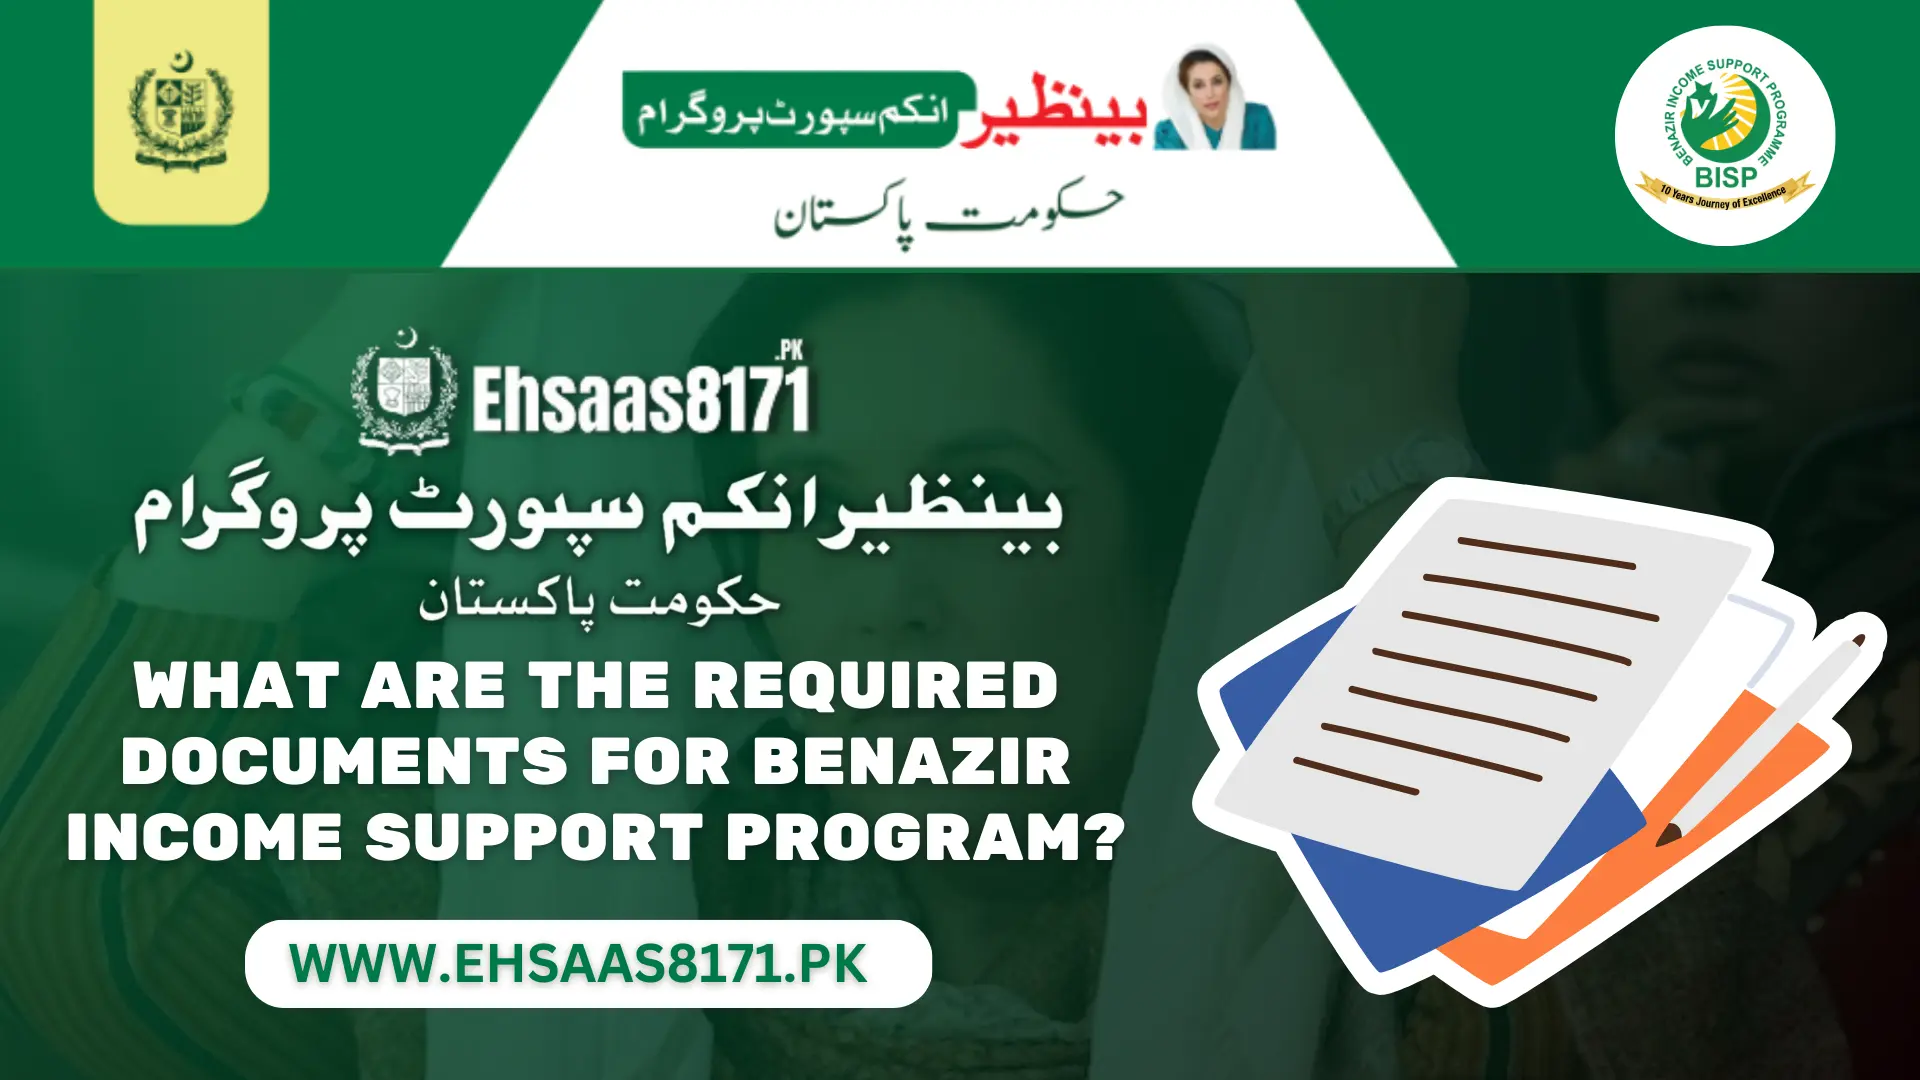 What are the required documents for Benazir Income Support Program?